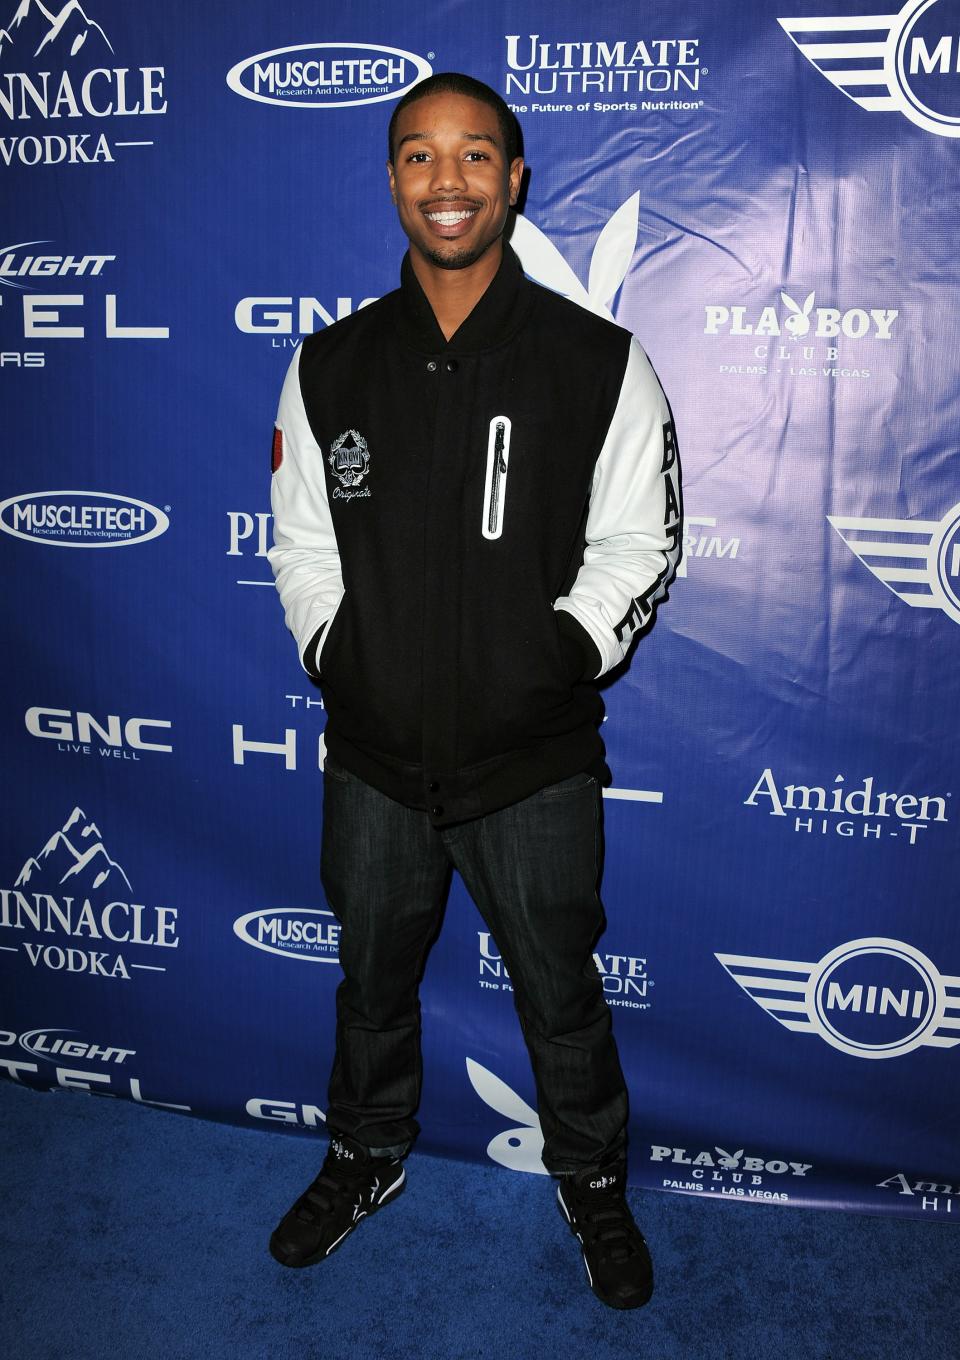 Bud Light Hotel Hosts The Playboy Party With Performances By Snoop Dogg, Warren G And Flo Rida